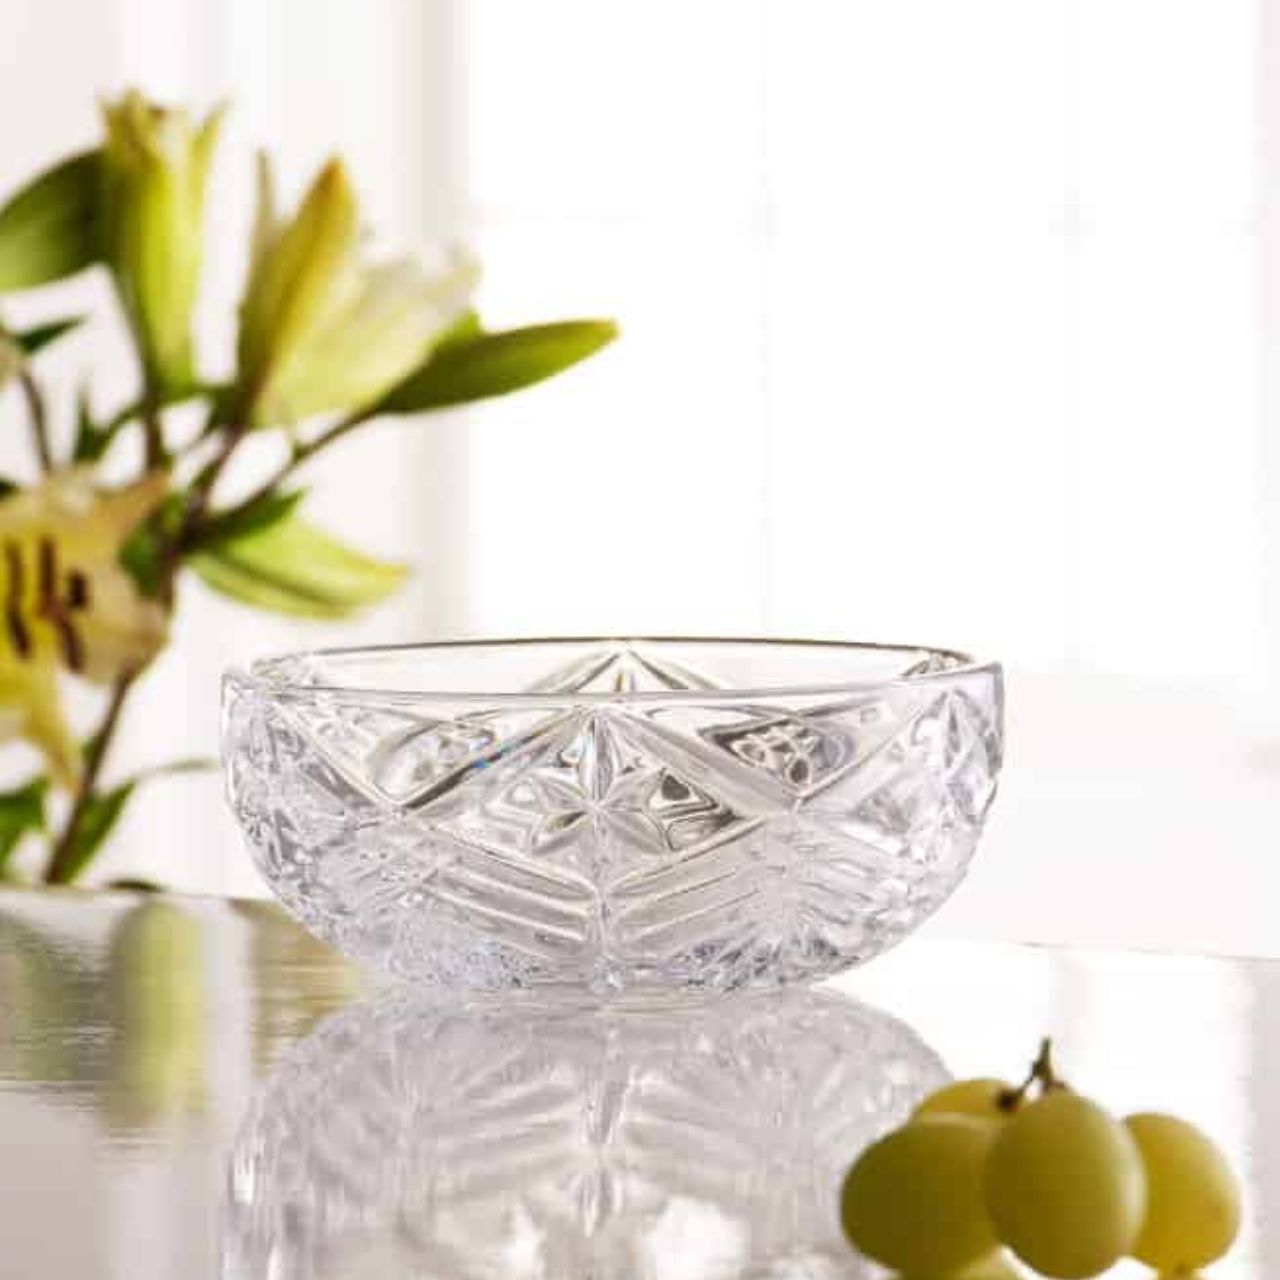 Galway Crystal Symphony 6" Bowl  Galway Crystal Symphony has a unique and beautiful design. It captures light and reflections no matter where it is placed. It makes the perfect Homeware Gift either for someone special or for yourself!